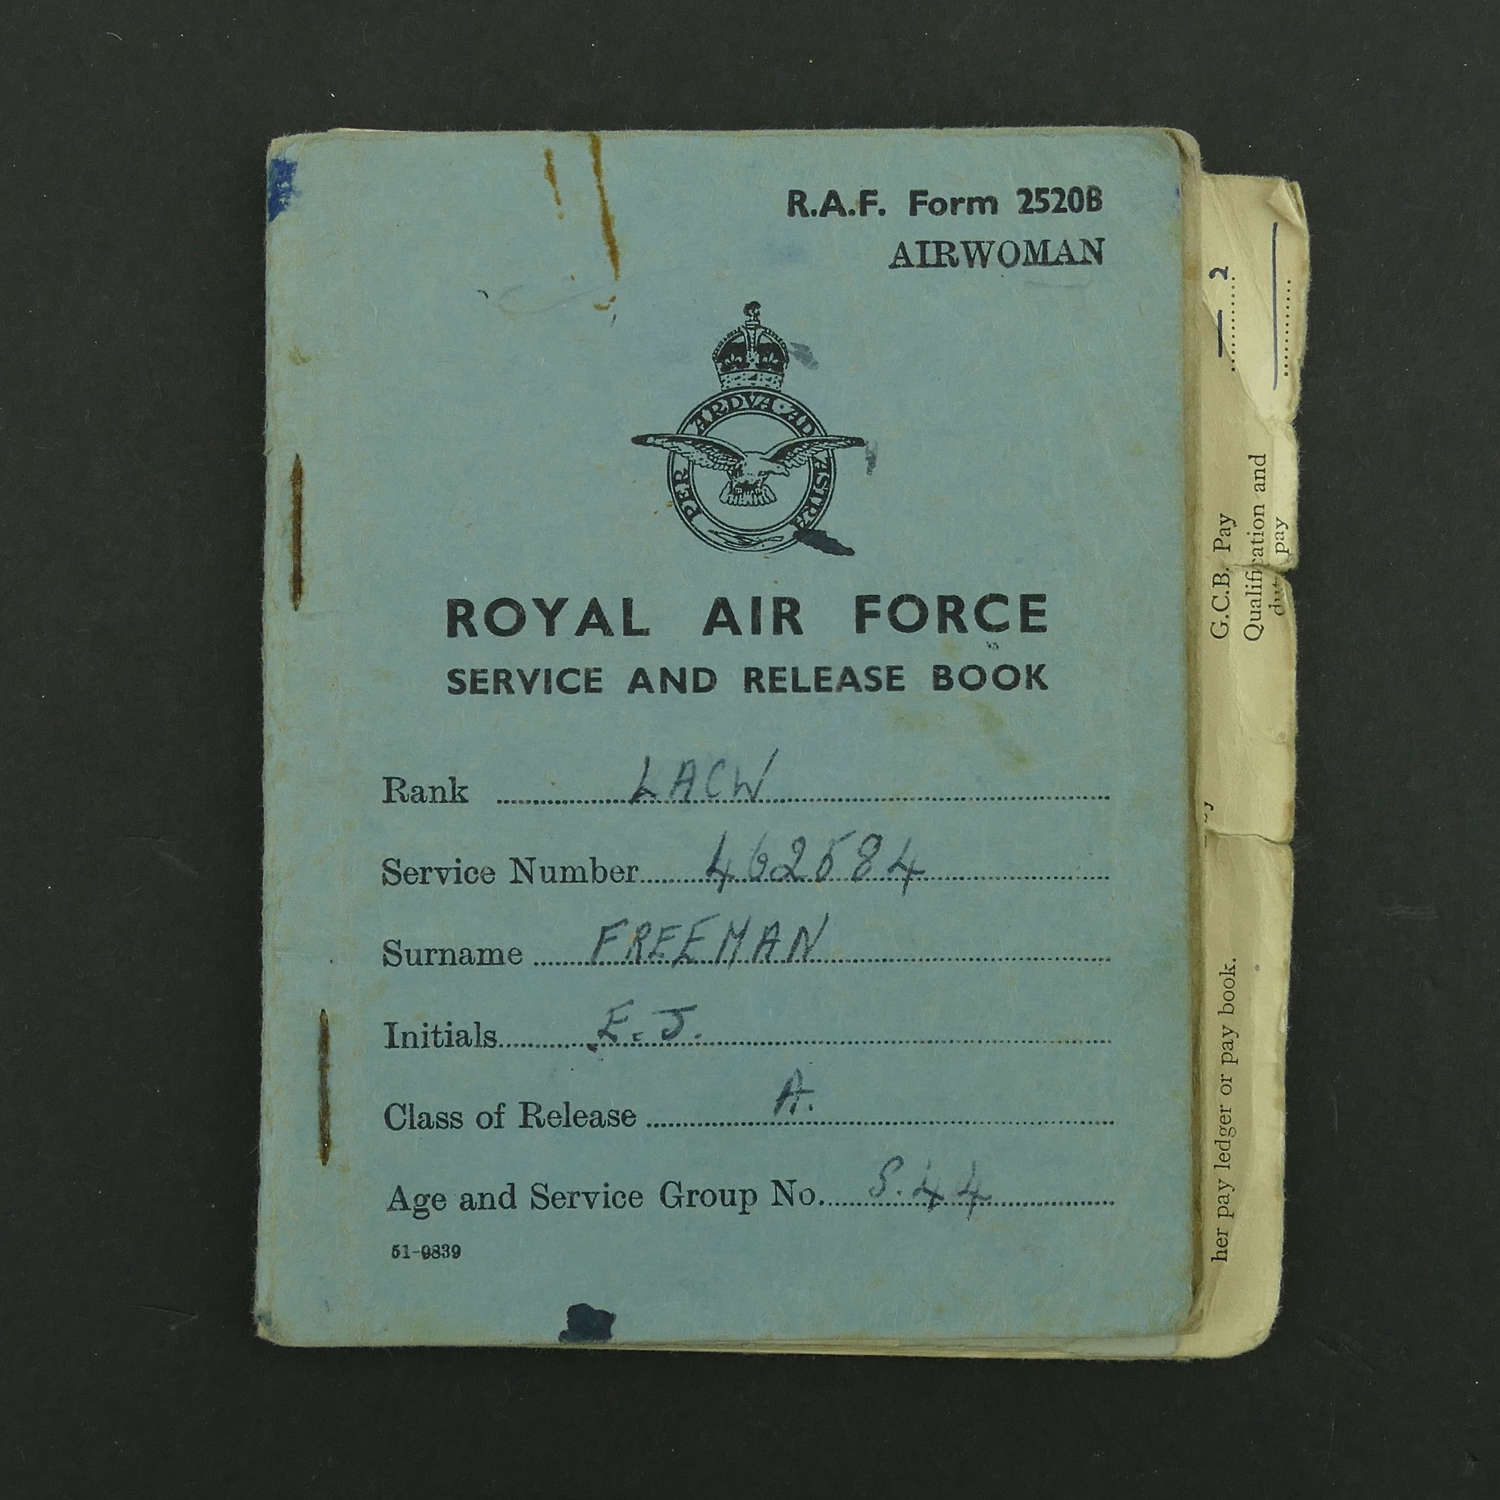 WAAF service and release book, LACW Freeman